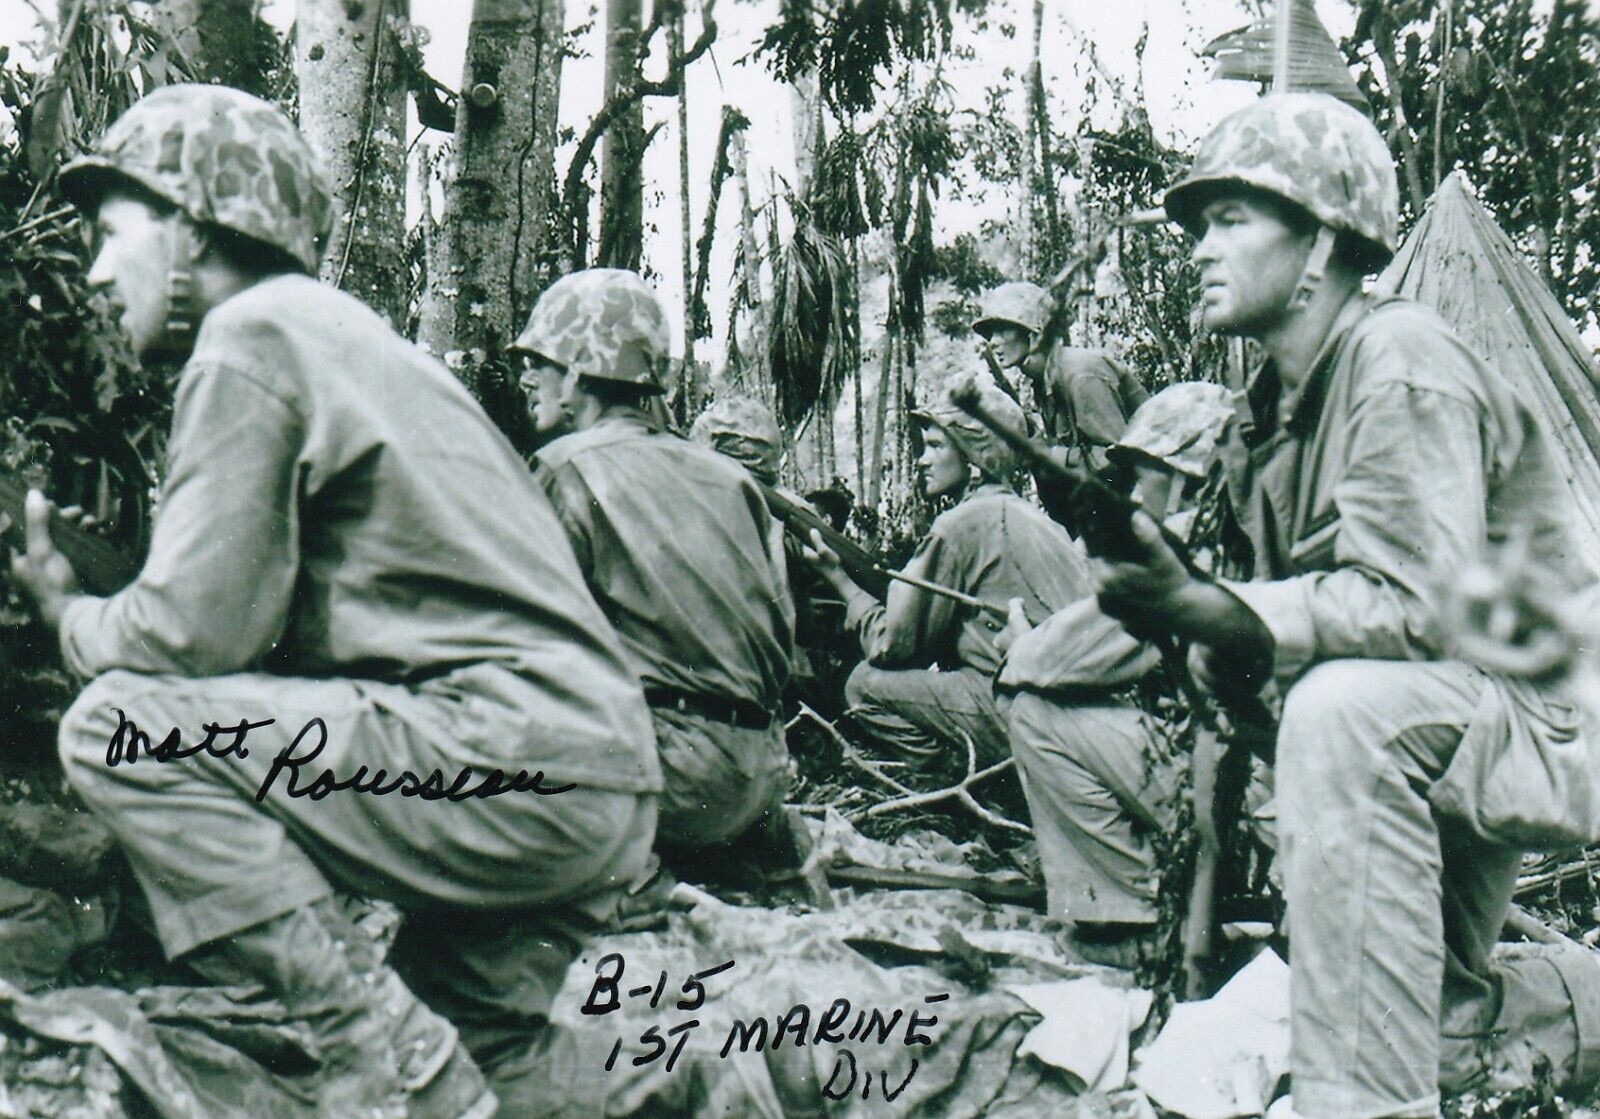 HBO The Pacific M.Rousseau WWII Guadalcanal SIGNED 4x6 w/ John Basilone in B-1-5